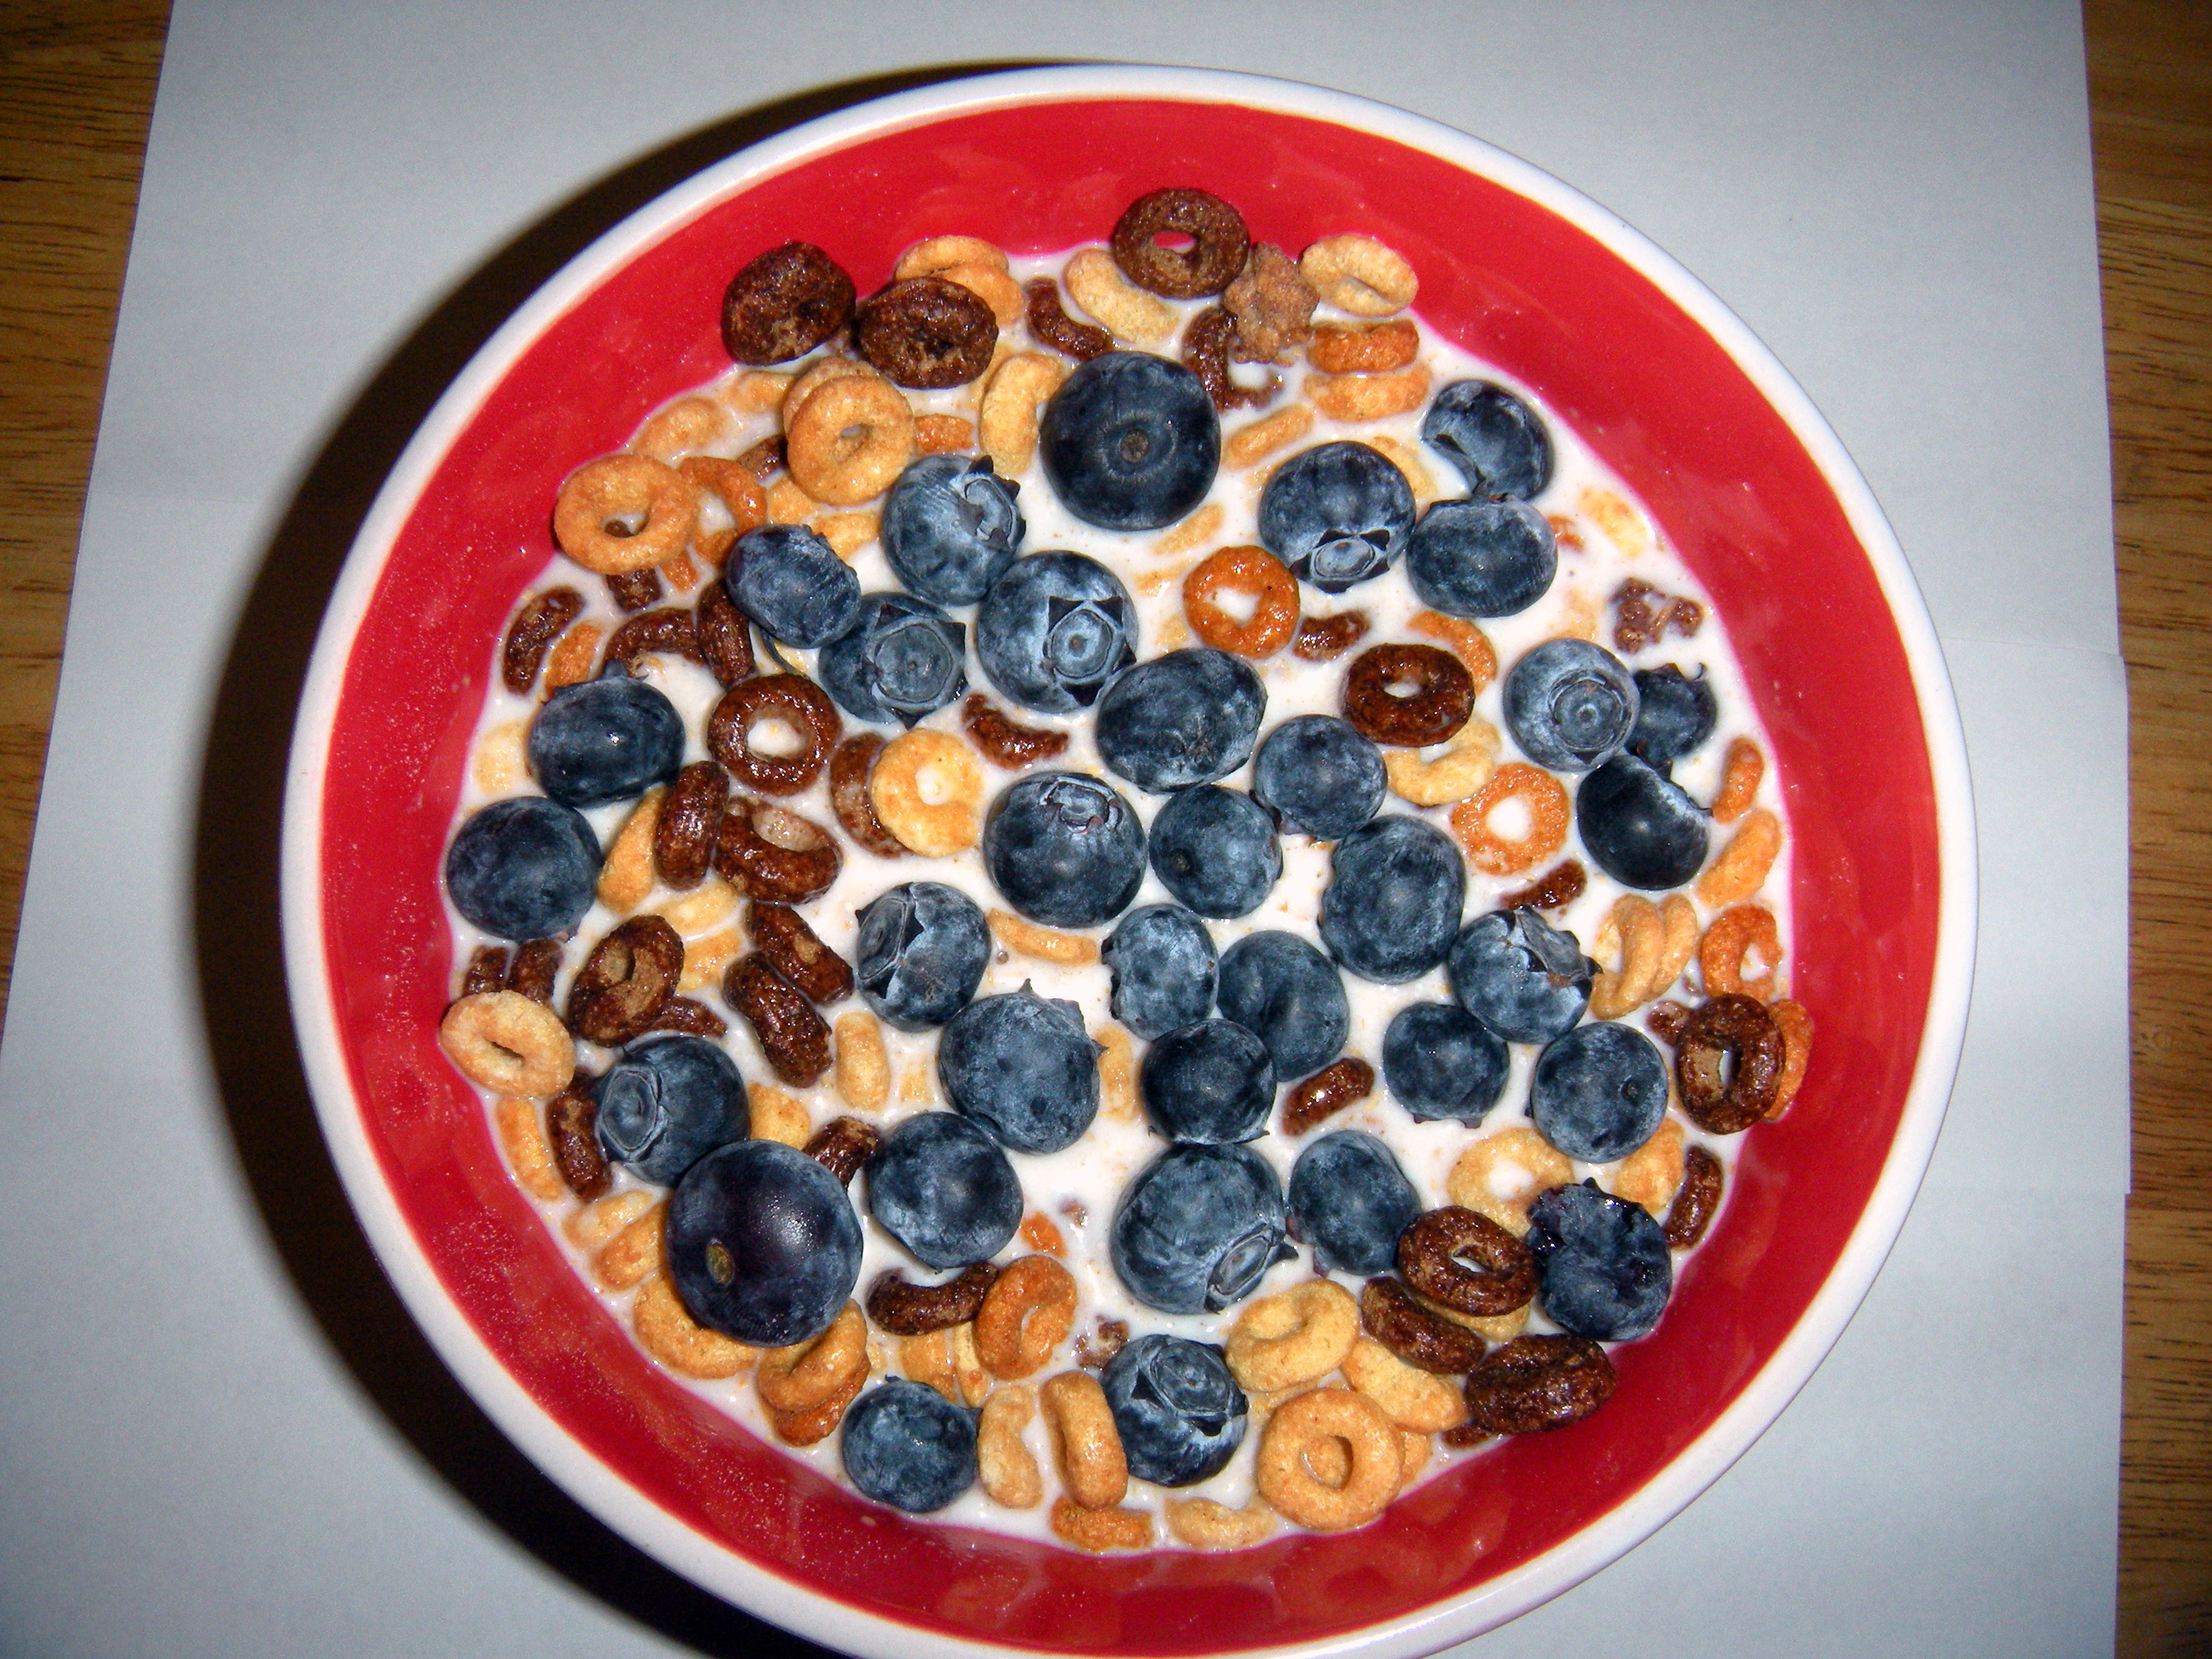 Colorful cereal photo